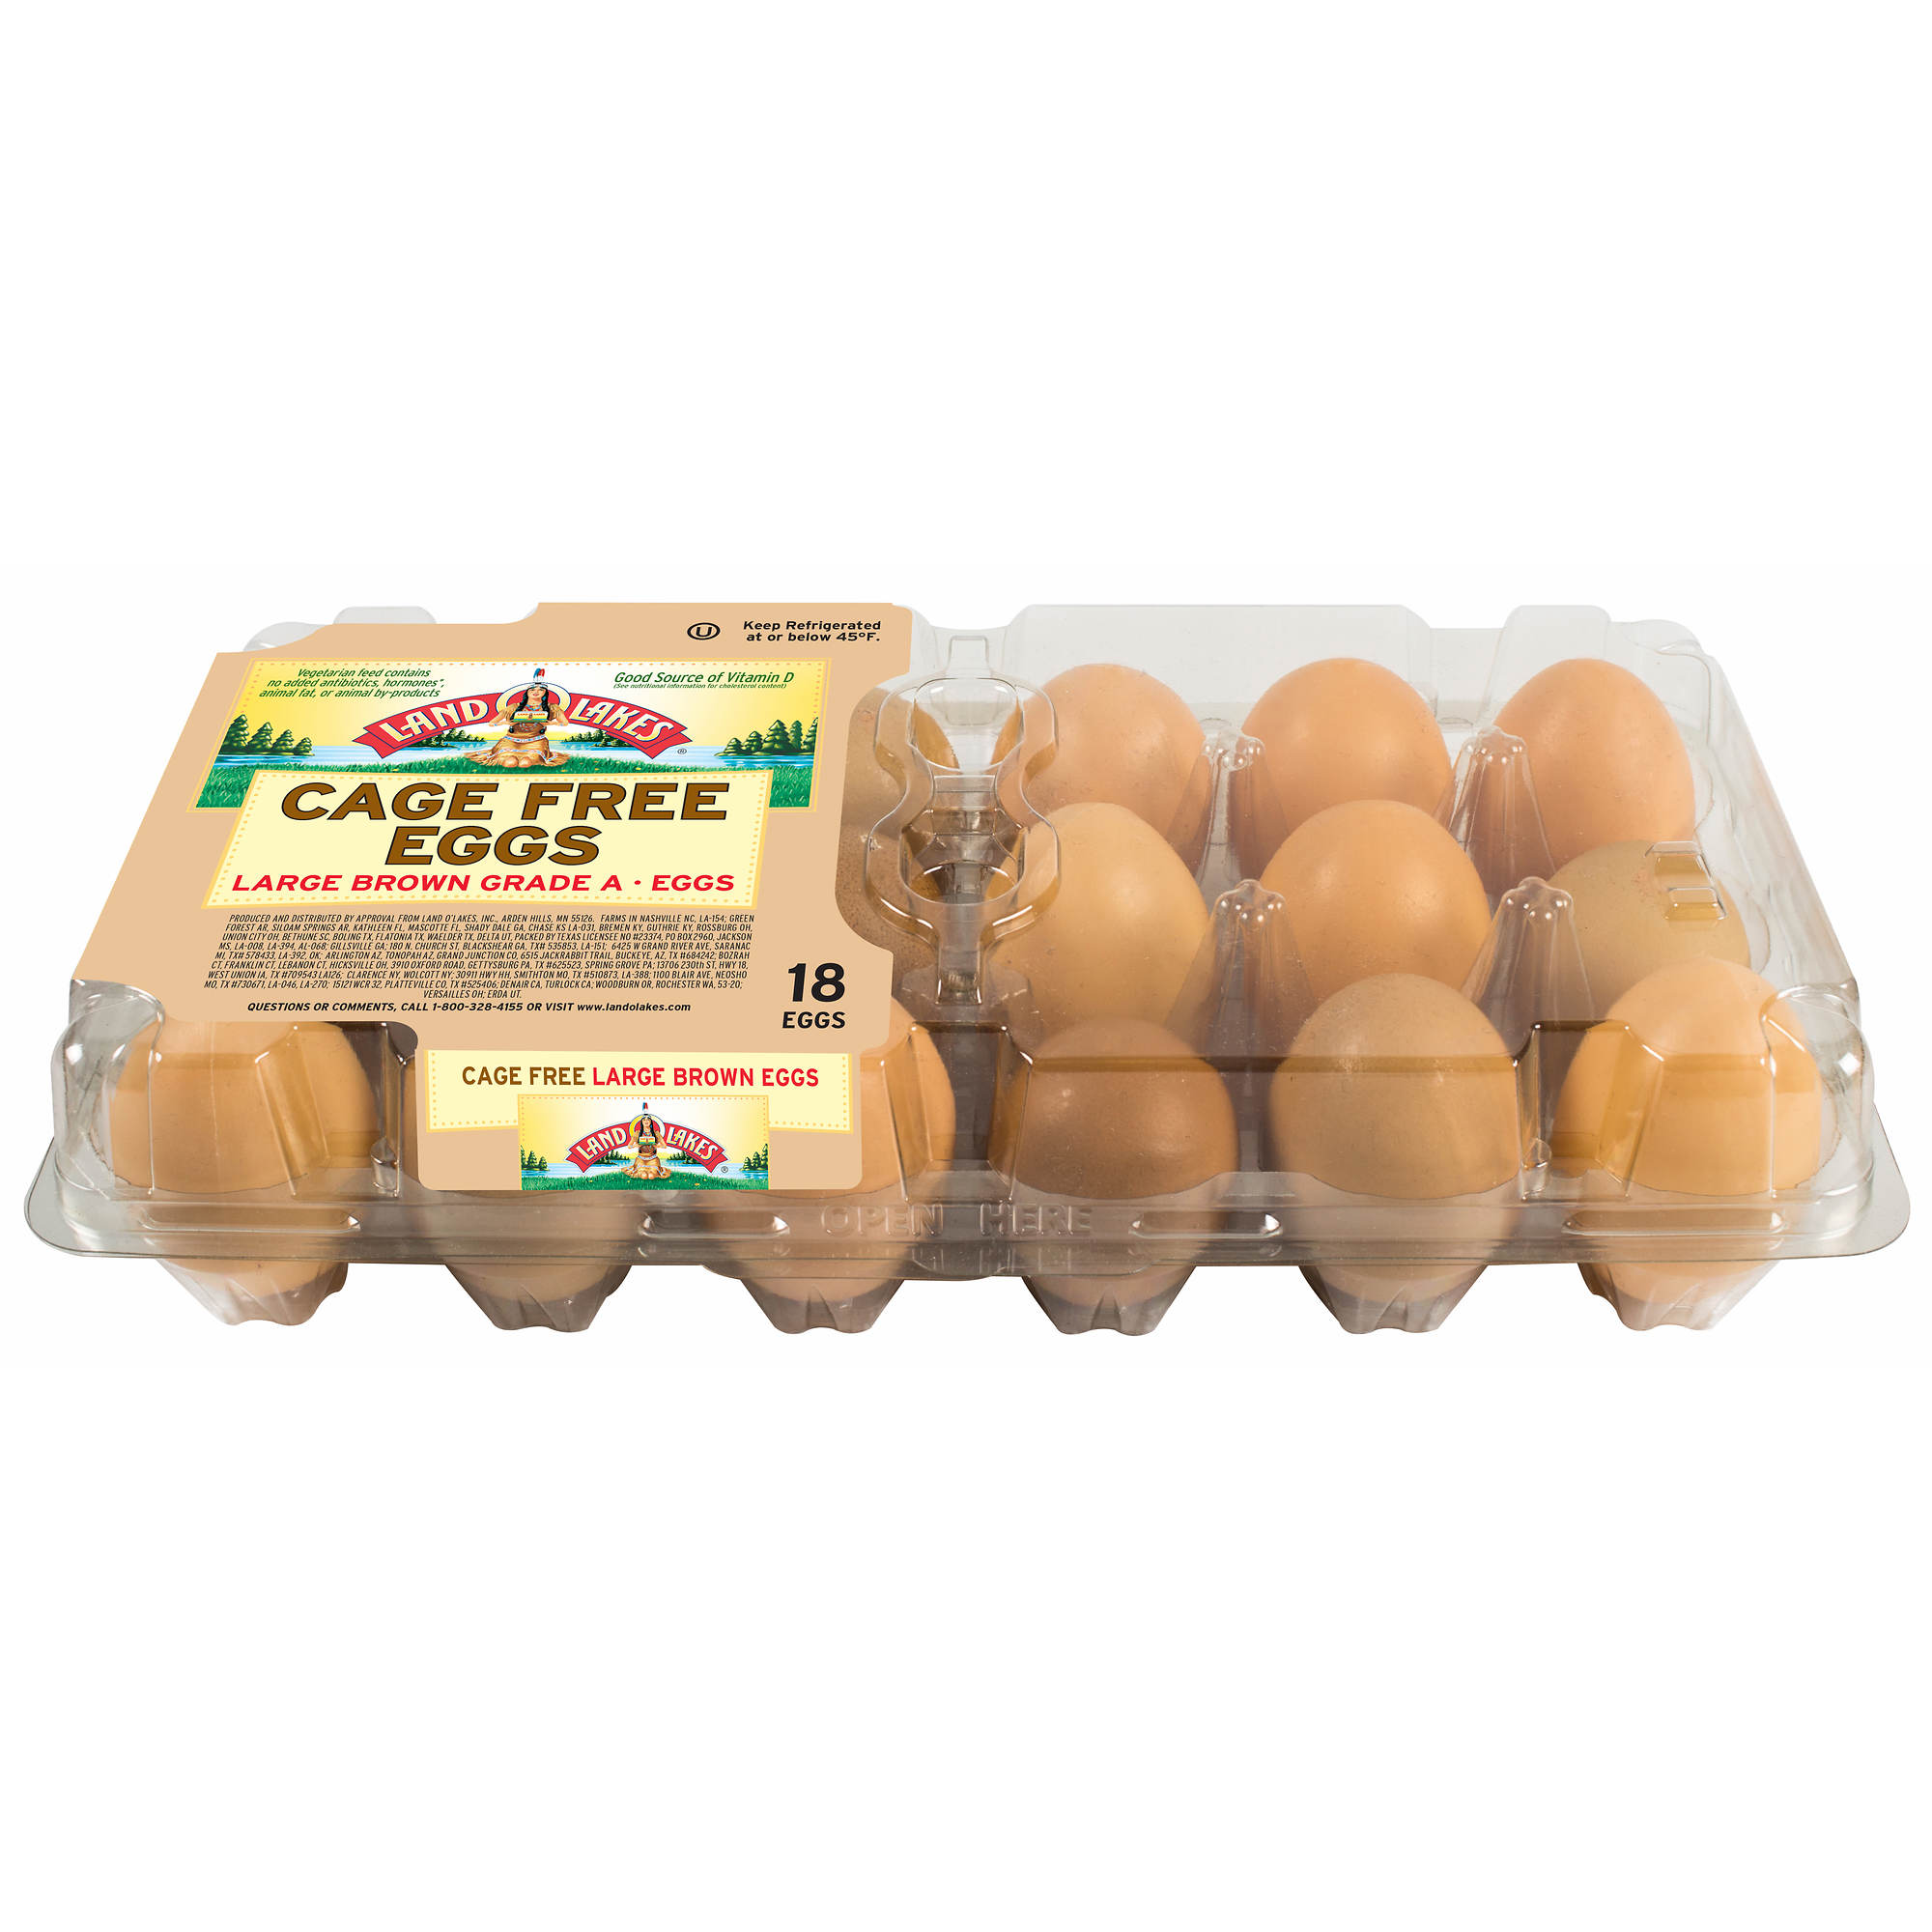 Land O'Lakes CageFree Large Brown Eggs, 18 ct. BJ's Wholesale Club